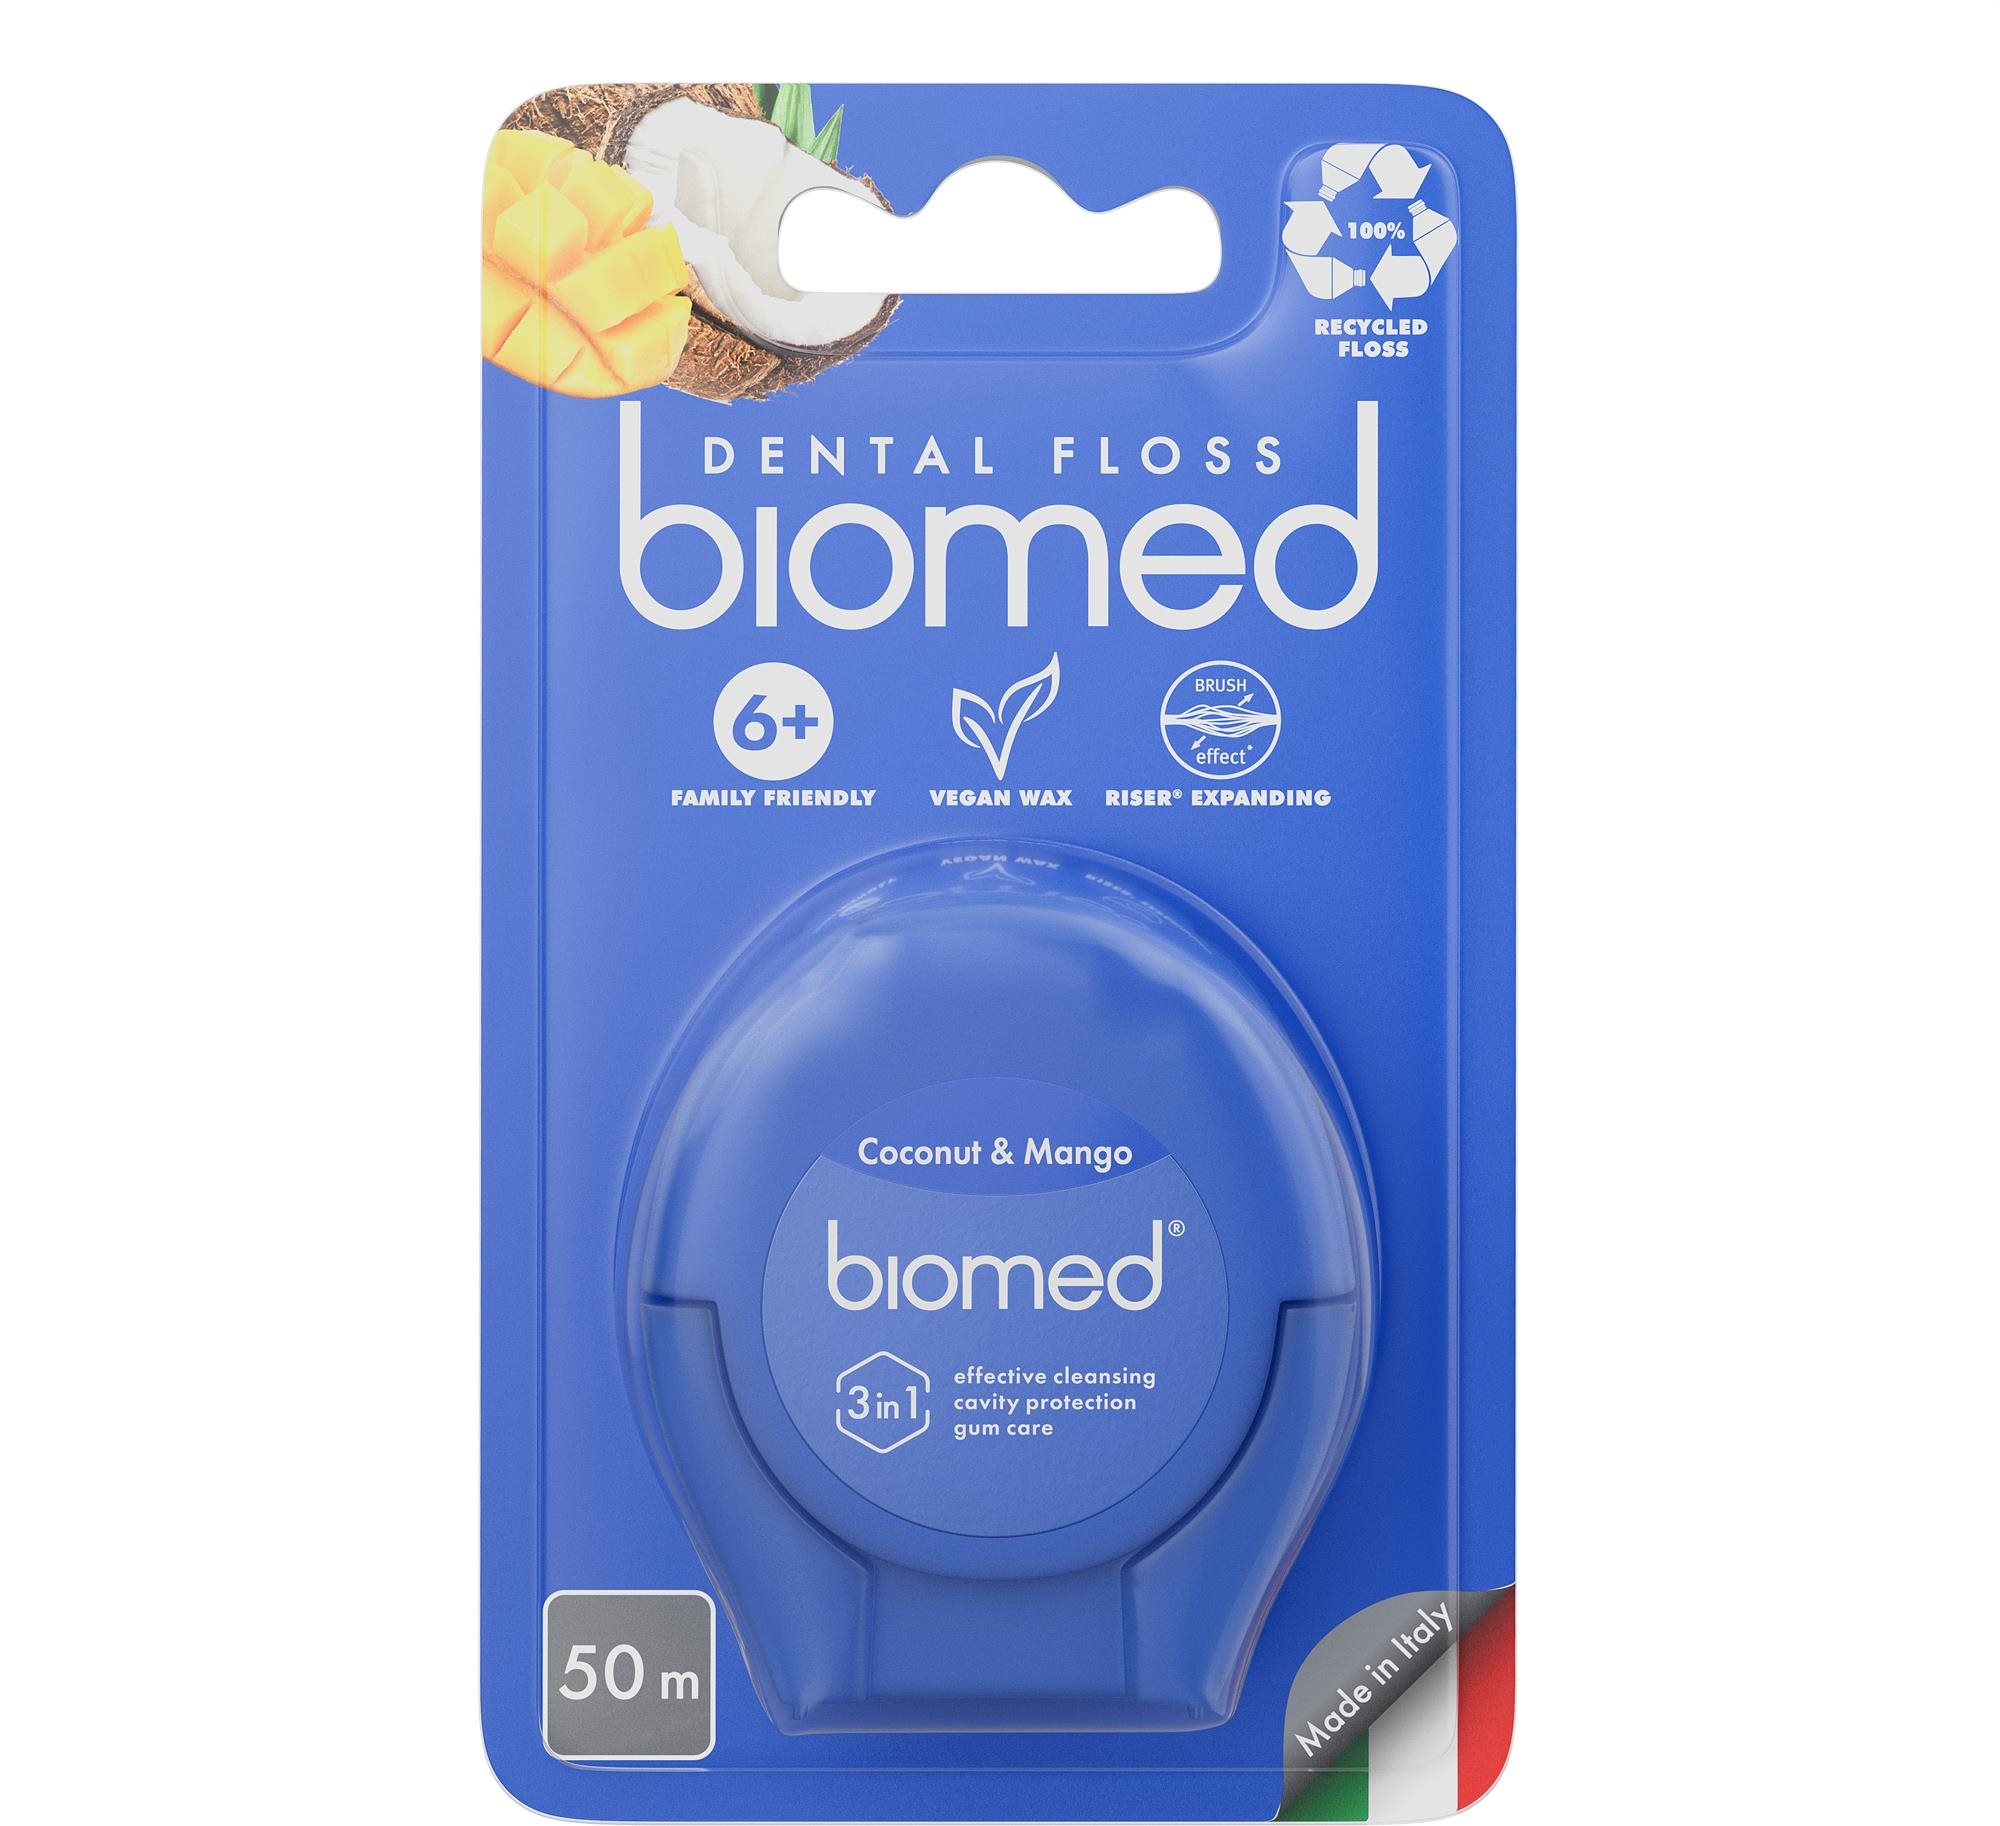 BIOMED Coconut and Mango 50m